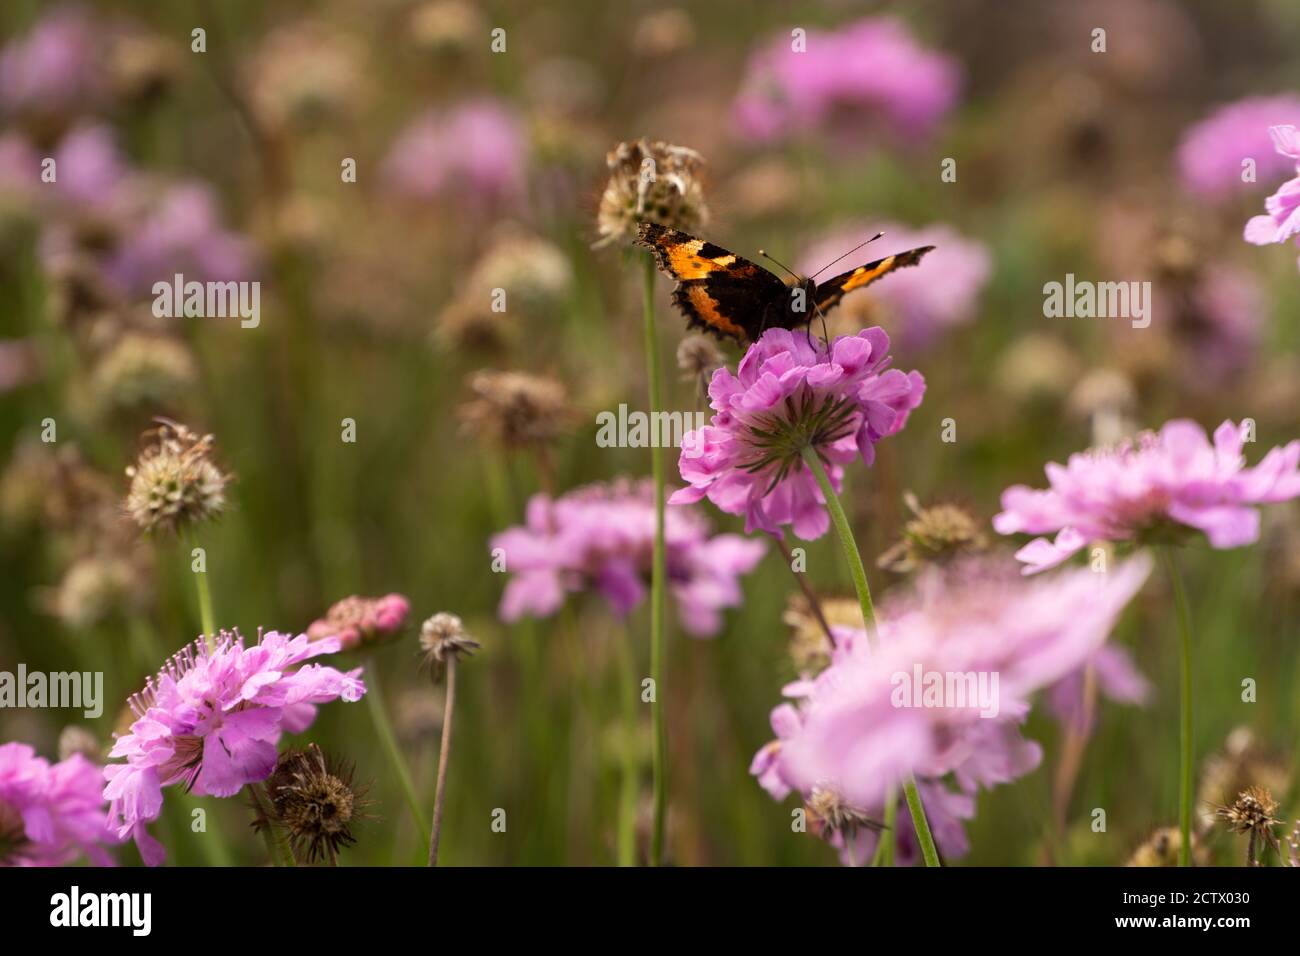 A butterfly on a bright flower, Isles of Scilly Stock Photo